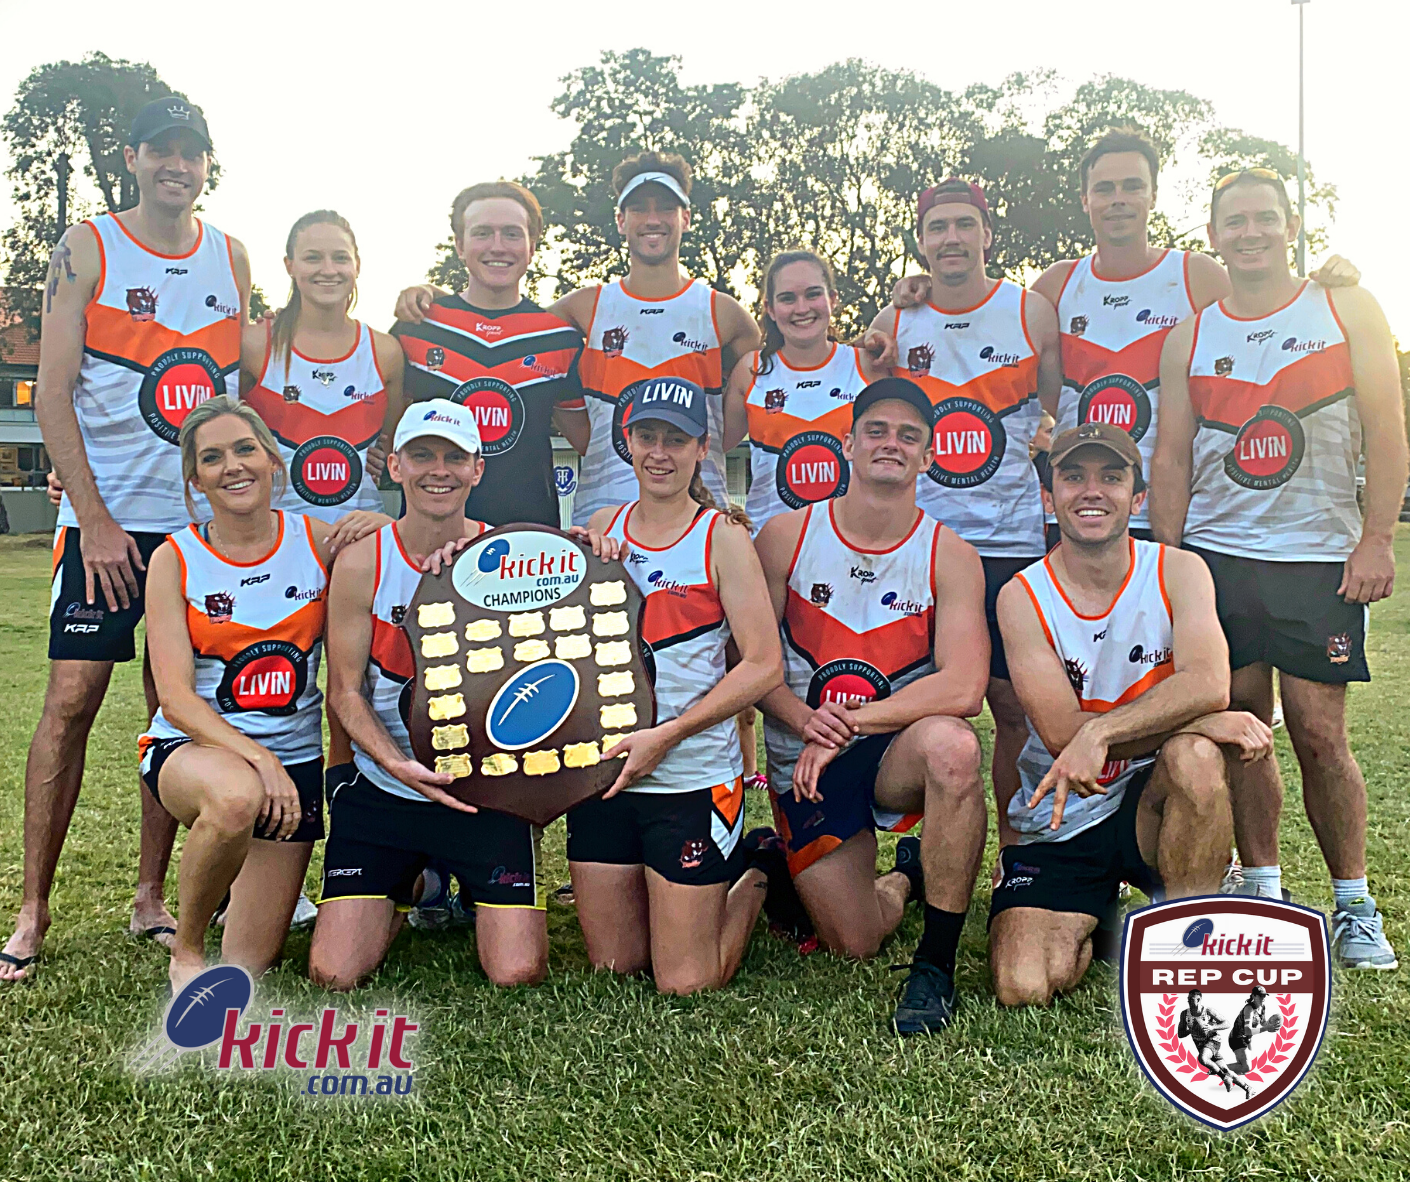 Rep Cup 2021: Tigers Mixed, Sharks Mens Claim Wins